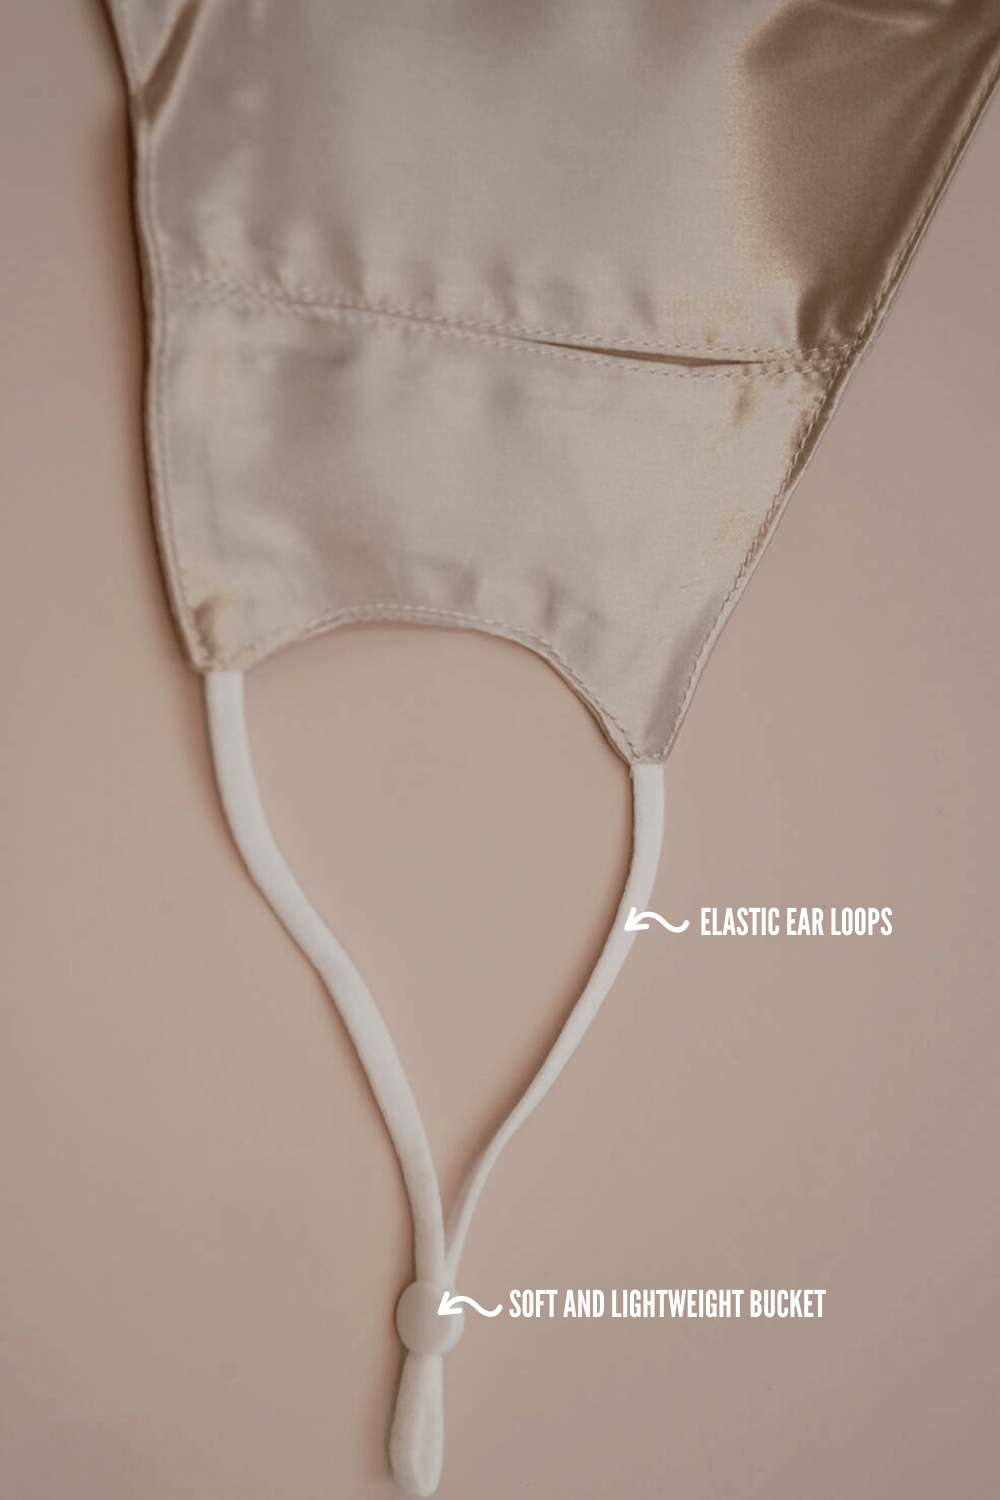 STELLAR Silk Face Mask - Pearl White (with Nose Wire and Filter Pocket) - BASK ™